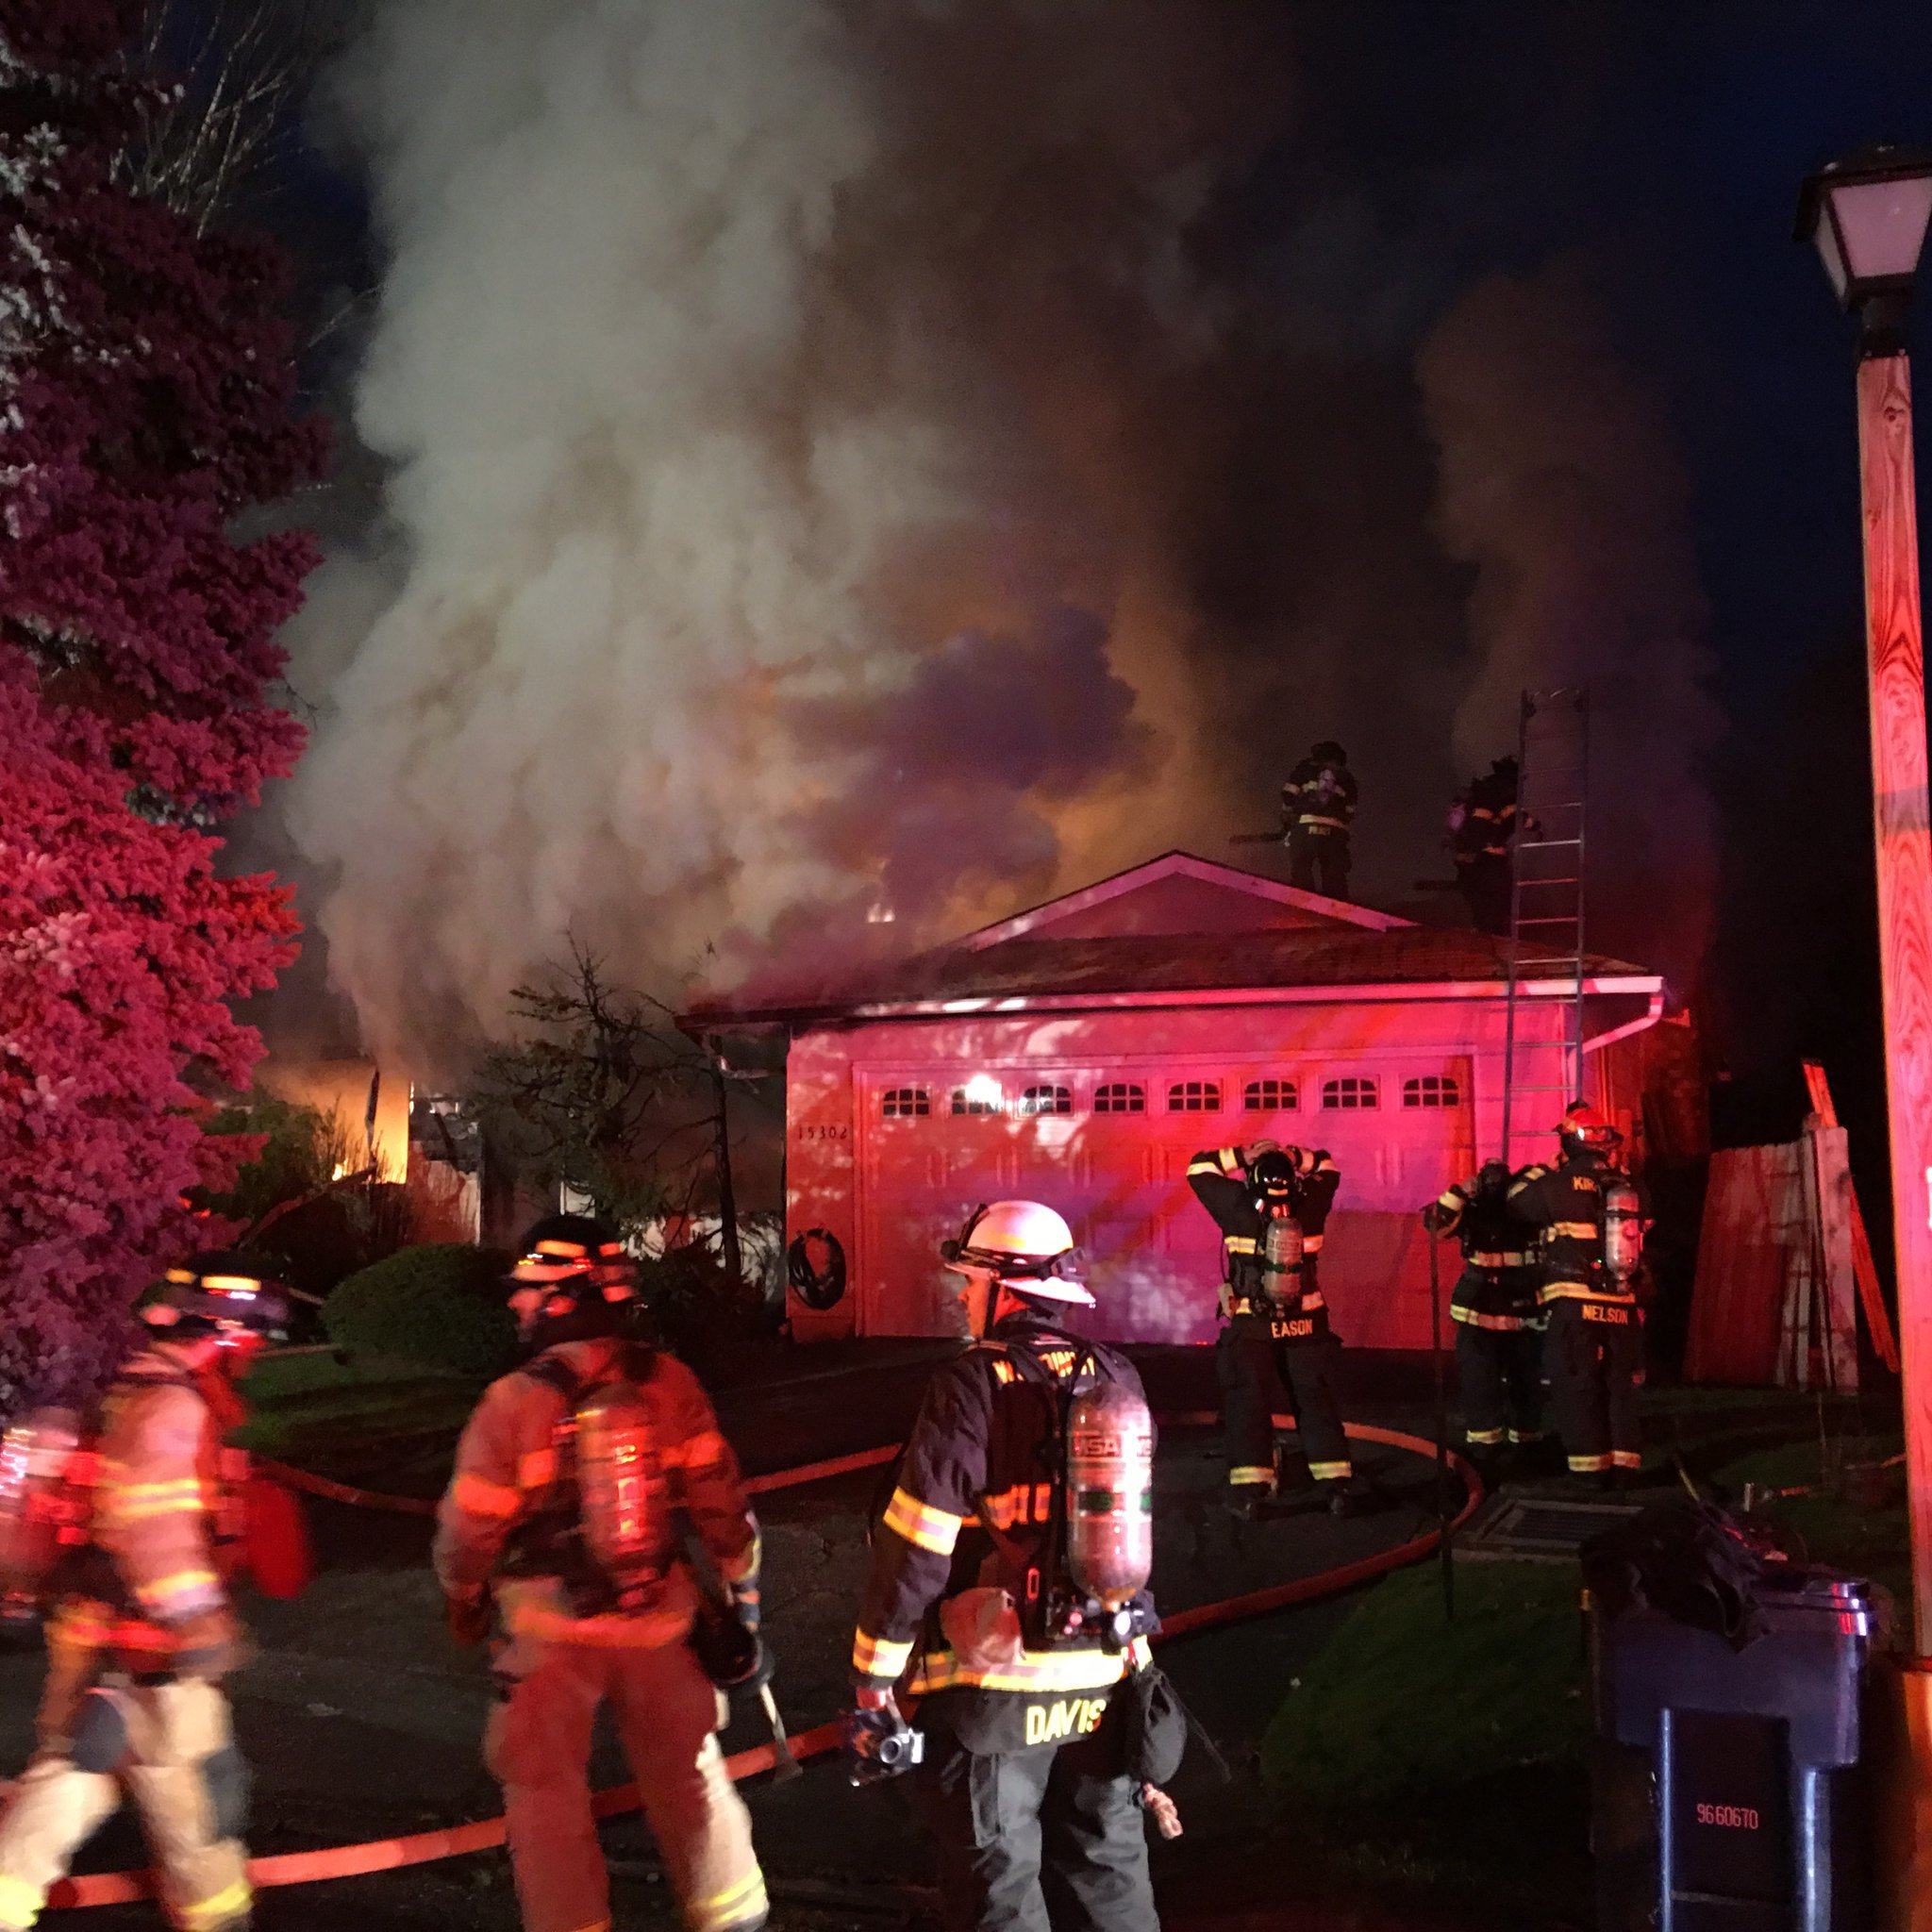 Five departments, including Bothell Fire and E.M.S., responded to this house fire in Bothell on Monday evening. Photo courtesy of the Bothell Police Department